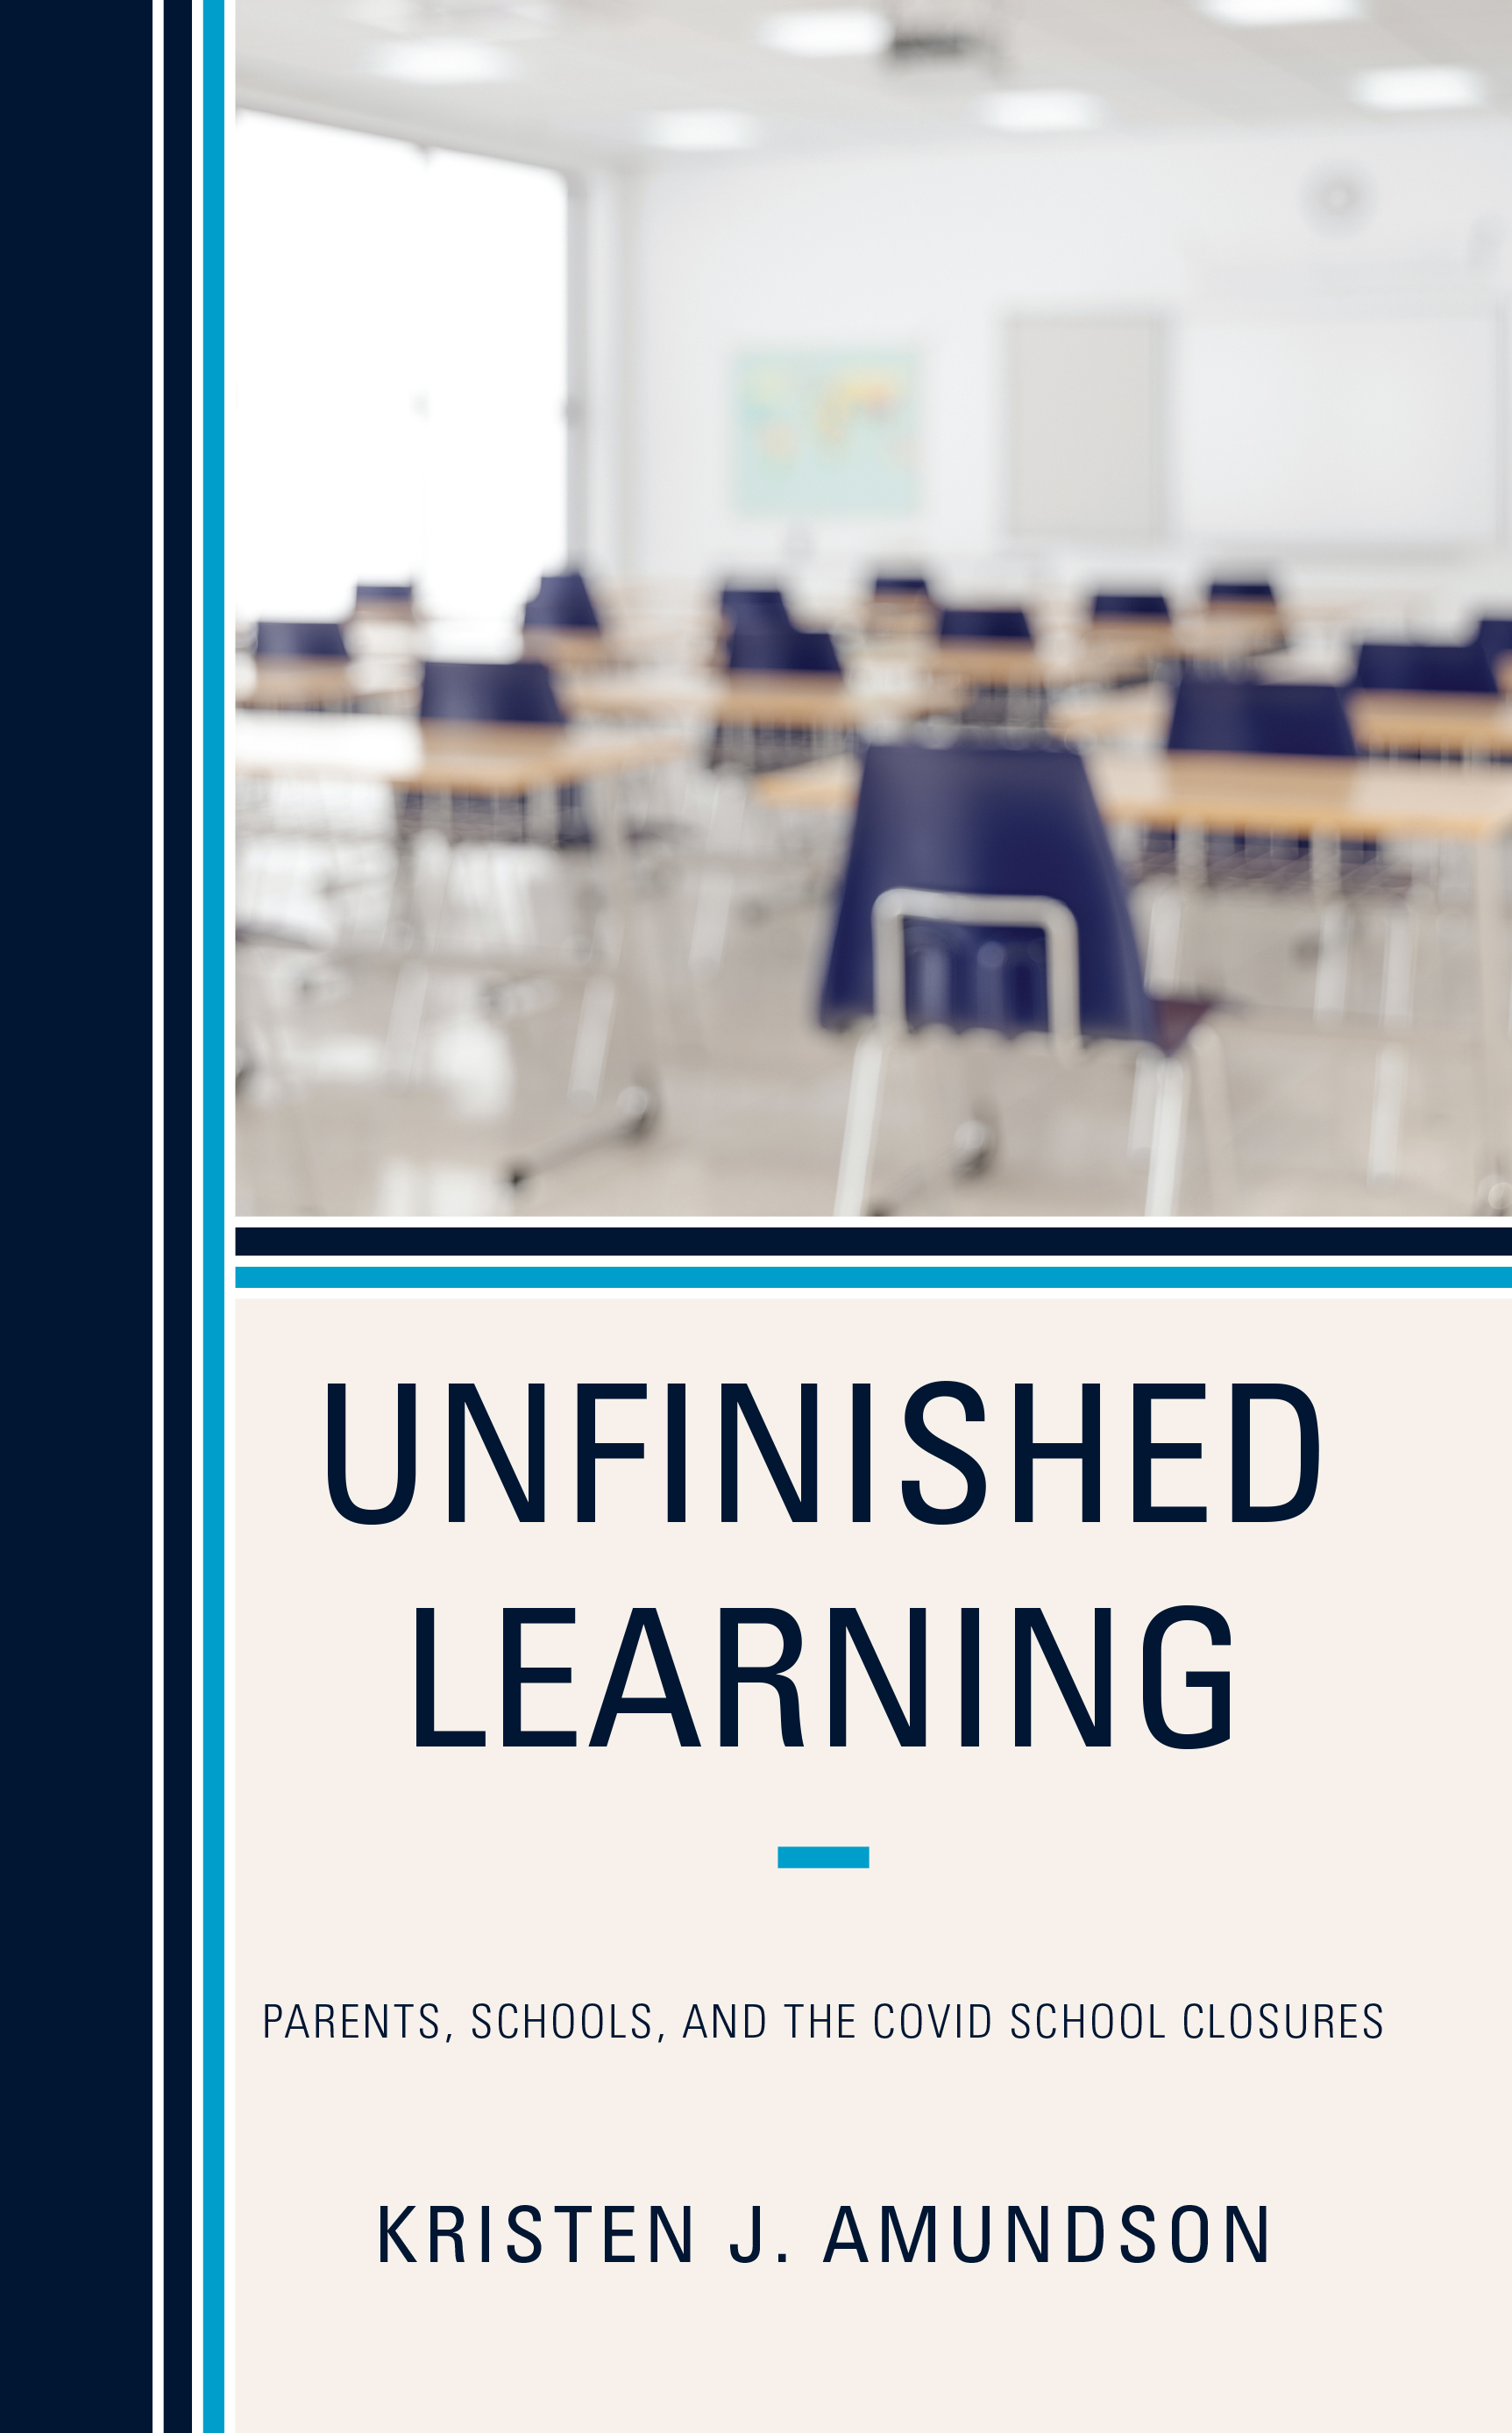 Unfinished Learning: Parents, Schools, and The COVID School Closures